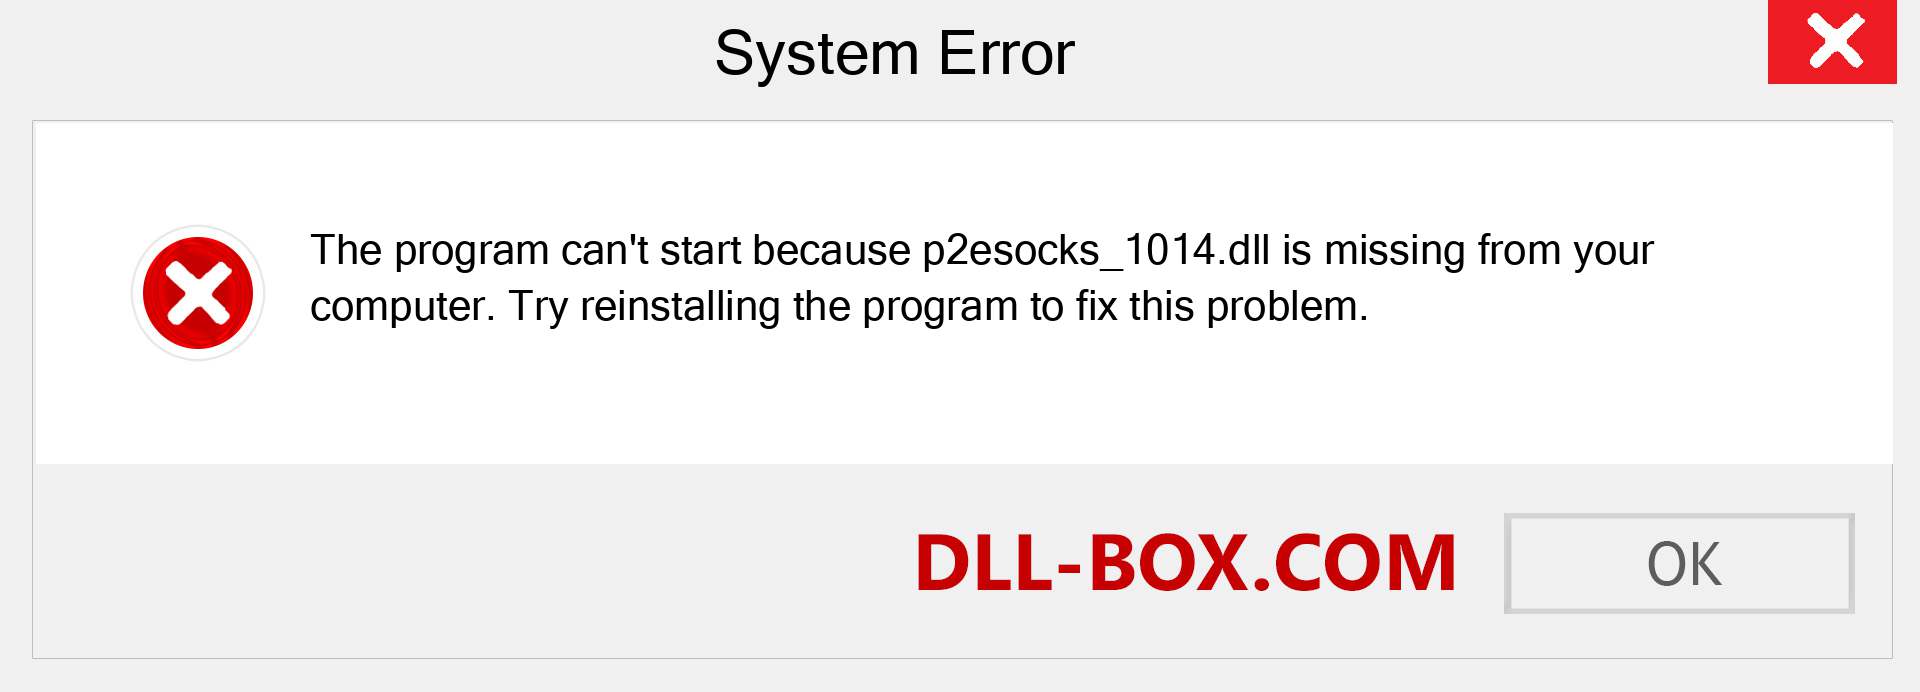  p2esocks_1014.dll file is missing?. Download for Windows 7, 8, 10 - Fix  p2esocks_1014 dll Missing Error on Windows, photos, images